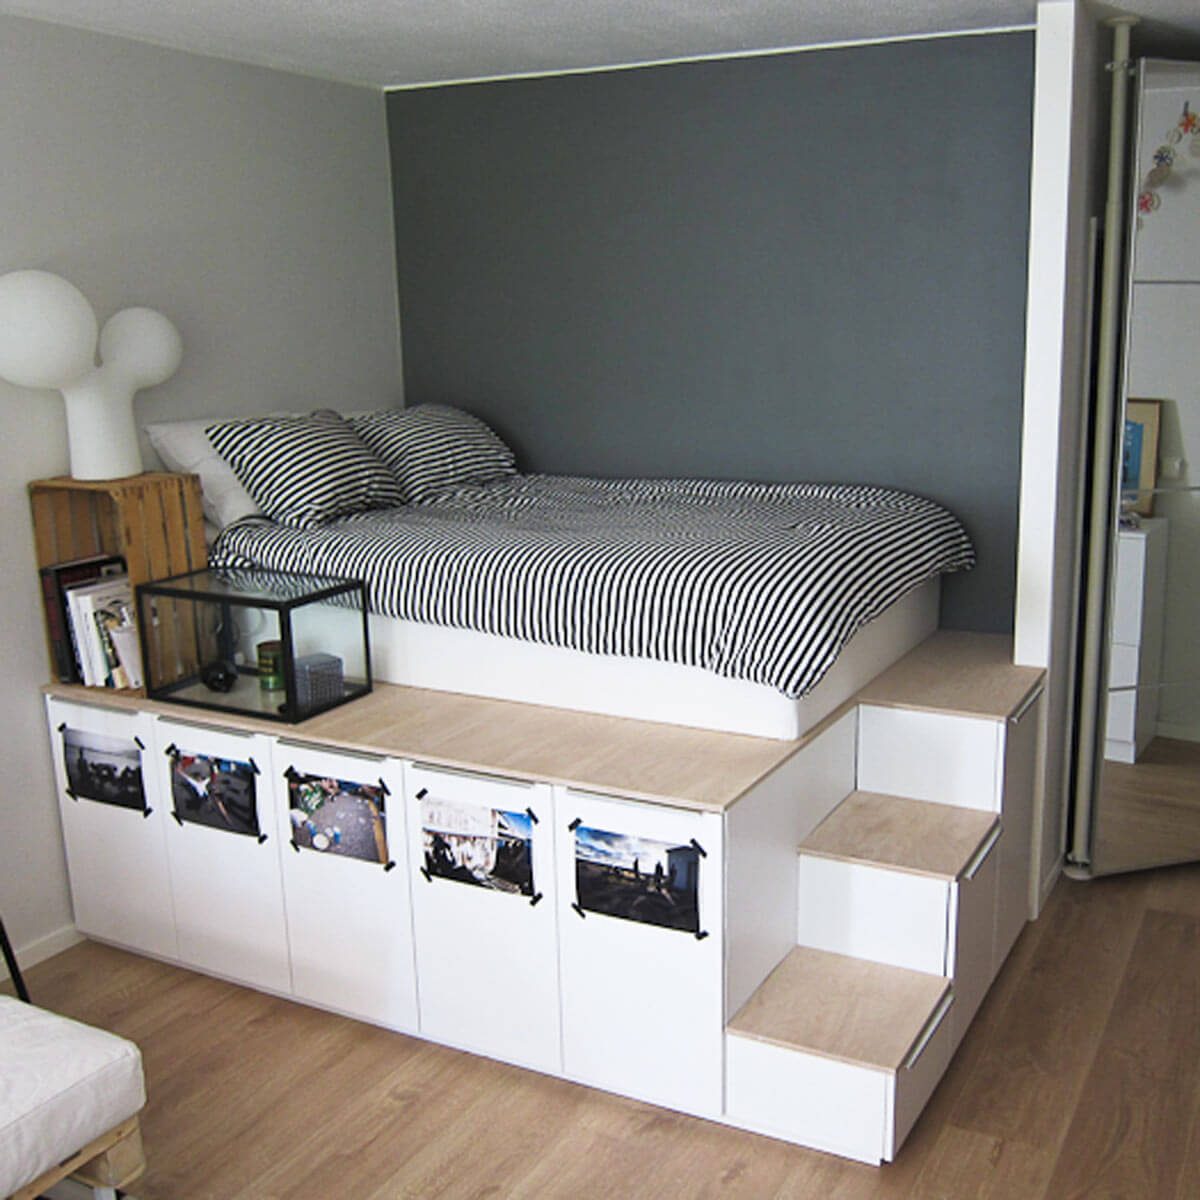 11 Great Diy Bed Frame Plans And Ideas The Family Handyman